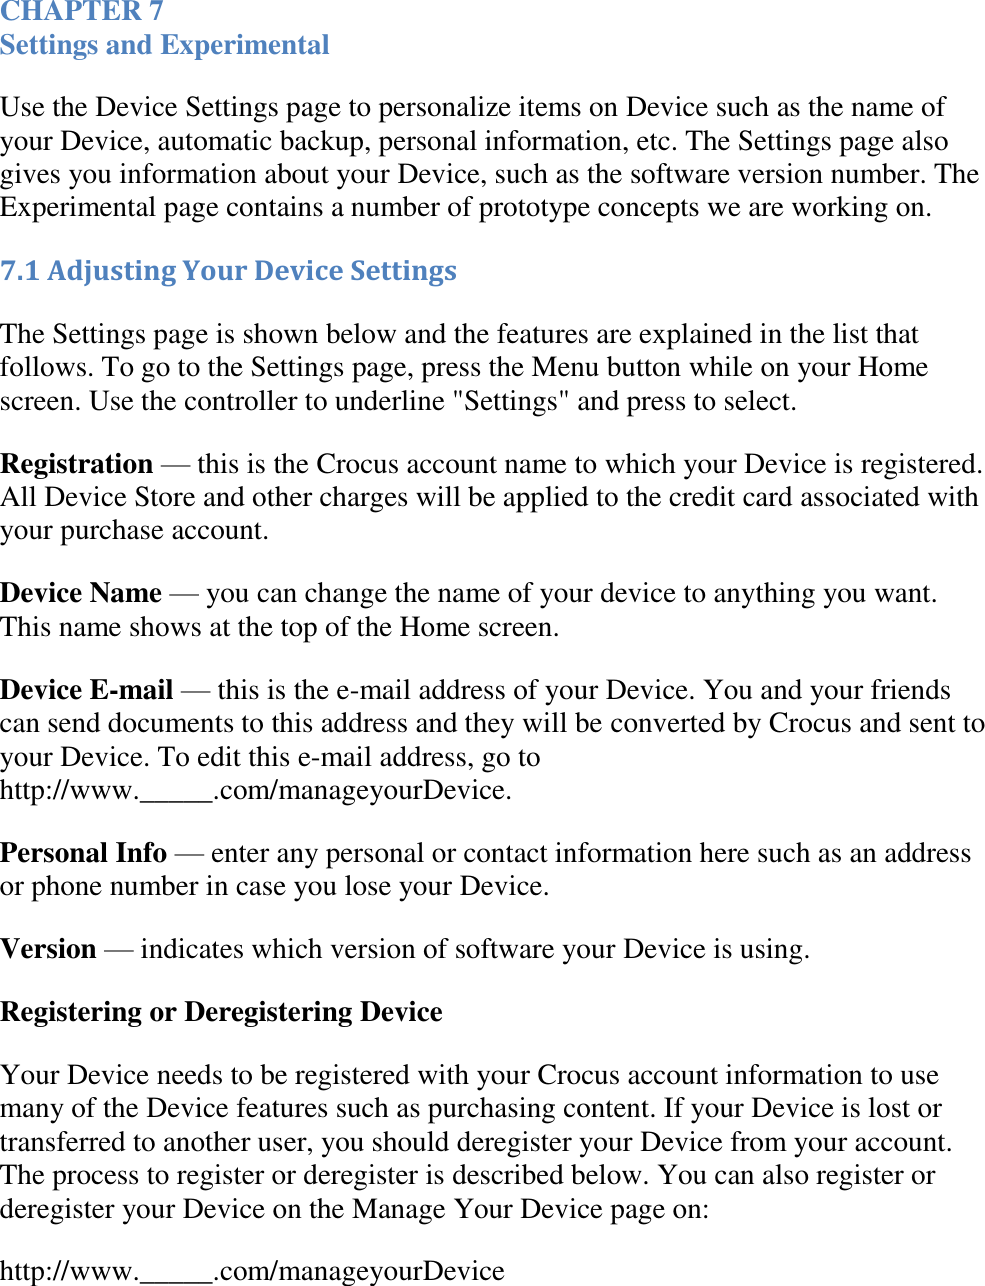   CHAPTER 7 Settings and Experimental Use the Device Settings page to personalize items on Device such as the name of your Device, automatic backup, personal information, etc. The Settings page also gives you information about your Device, such as the software version number. The Experimental page contains a number of prototype concepts we are working on. 7.1 Adjusting Your Device Settings The Settings page is shown below and the features are explained in the list that follows. To go to the Settings page, press the Menu button while on your Home screen. Use the controller to underline &quot;Settings&quot; and press to select. Registration — this is the Crocus account name to which your Device is registered. All Device Store and other charges will be applied to the credit card associated with your purchase account. Device Name — you can change the name of your device to anything you want. This name shows at the top of the Home screen. Device E-mail — this is the e-mail address of your Device. You and your friends can send documents to this address and they will be converted by Crocus and sent to your Device. To edit this e-mail address, go to http://www._____.com/manageyourDevice. Personal Info — enter any personal or contact information here such as an address or phone number in case you lose your Device. Version — indicates which version of software your Device is using. Registering or Deregistering Device Your Device needs to be registered with your Crocus account information to use many of the Device features such as purchasing content. If your Device is lost or transferred to another user, you should deregister your Device from your account. The process to register or deregister is described below. You can also register or deregister your Device on the Manage Your Device page on: http://www._____.com/manageyourDevice 